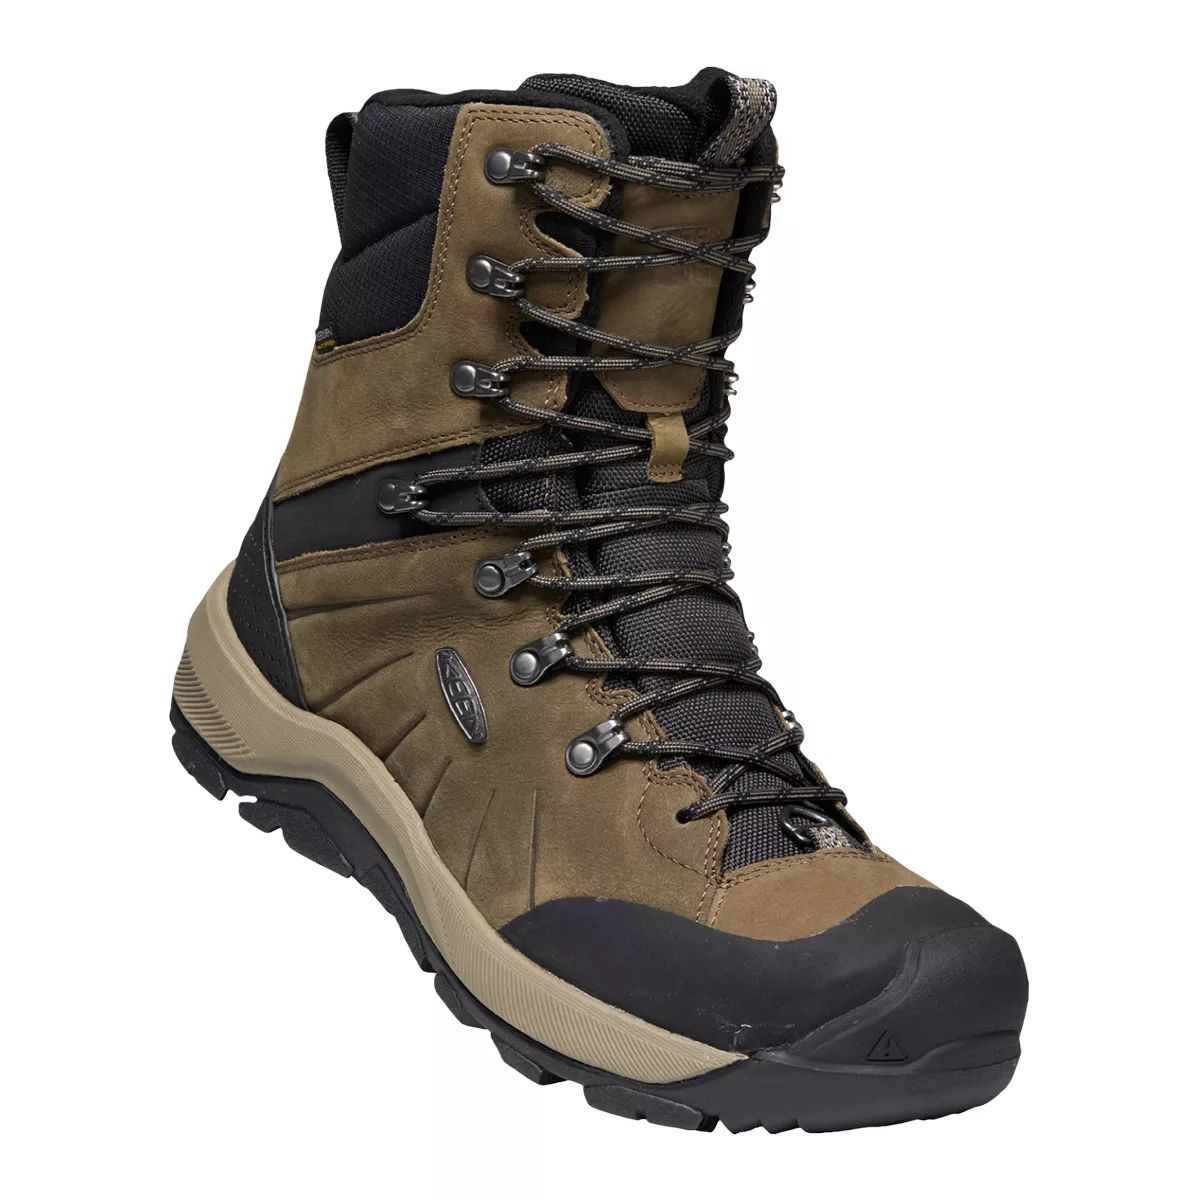 Image of Keen Men's Revel IV Tall Insulated Waterproof Winter Boots